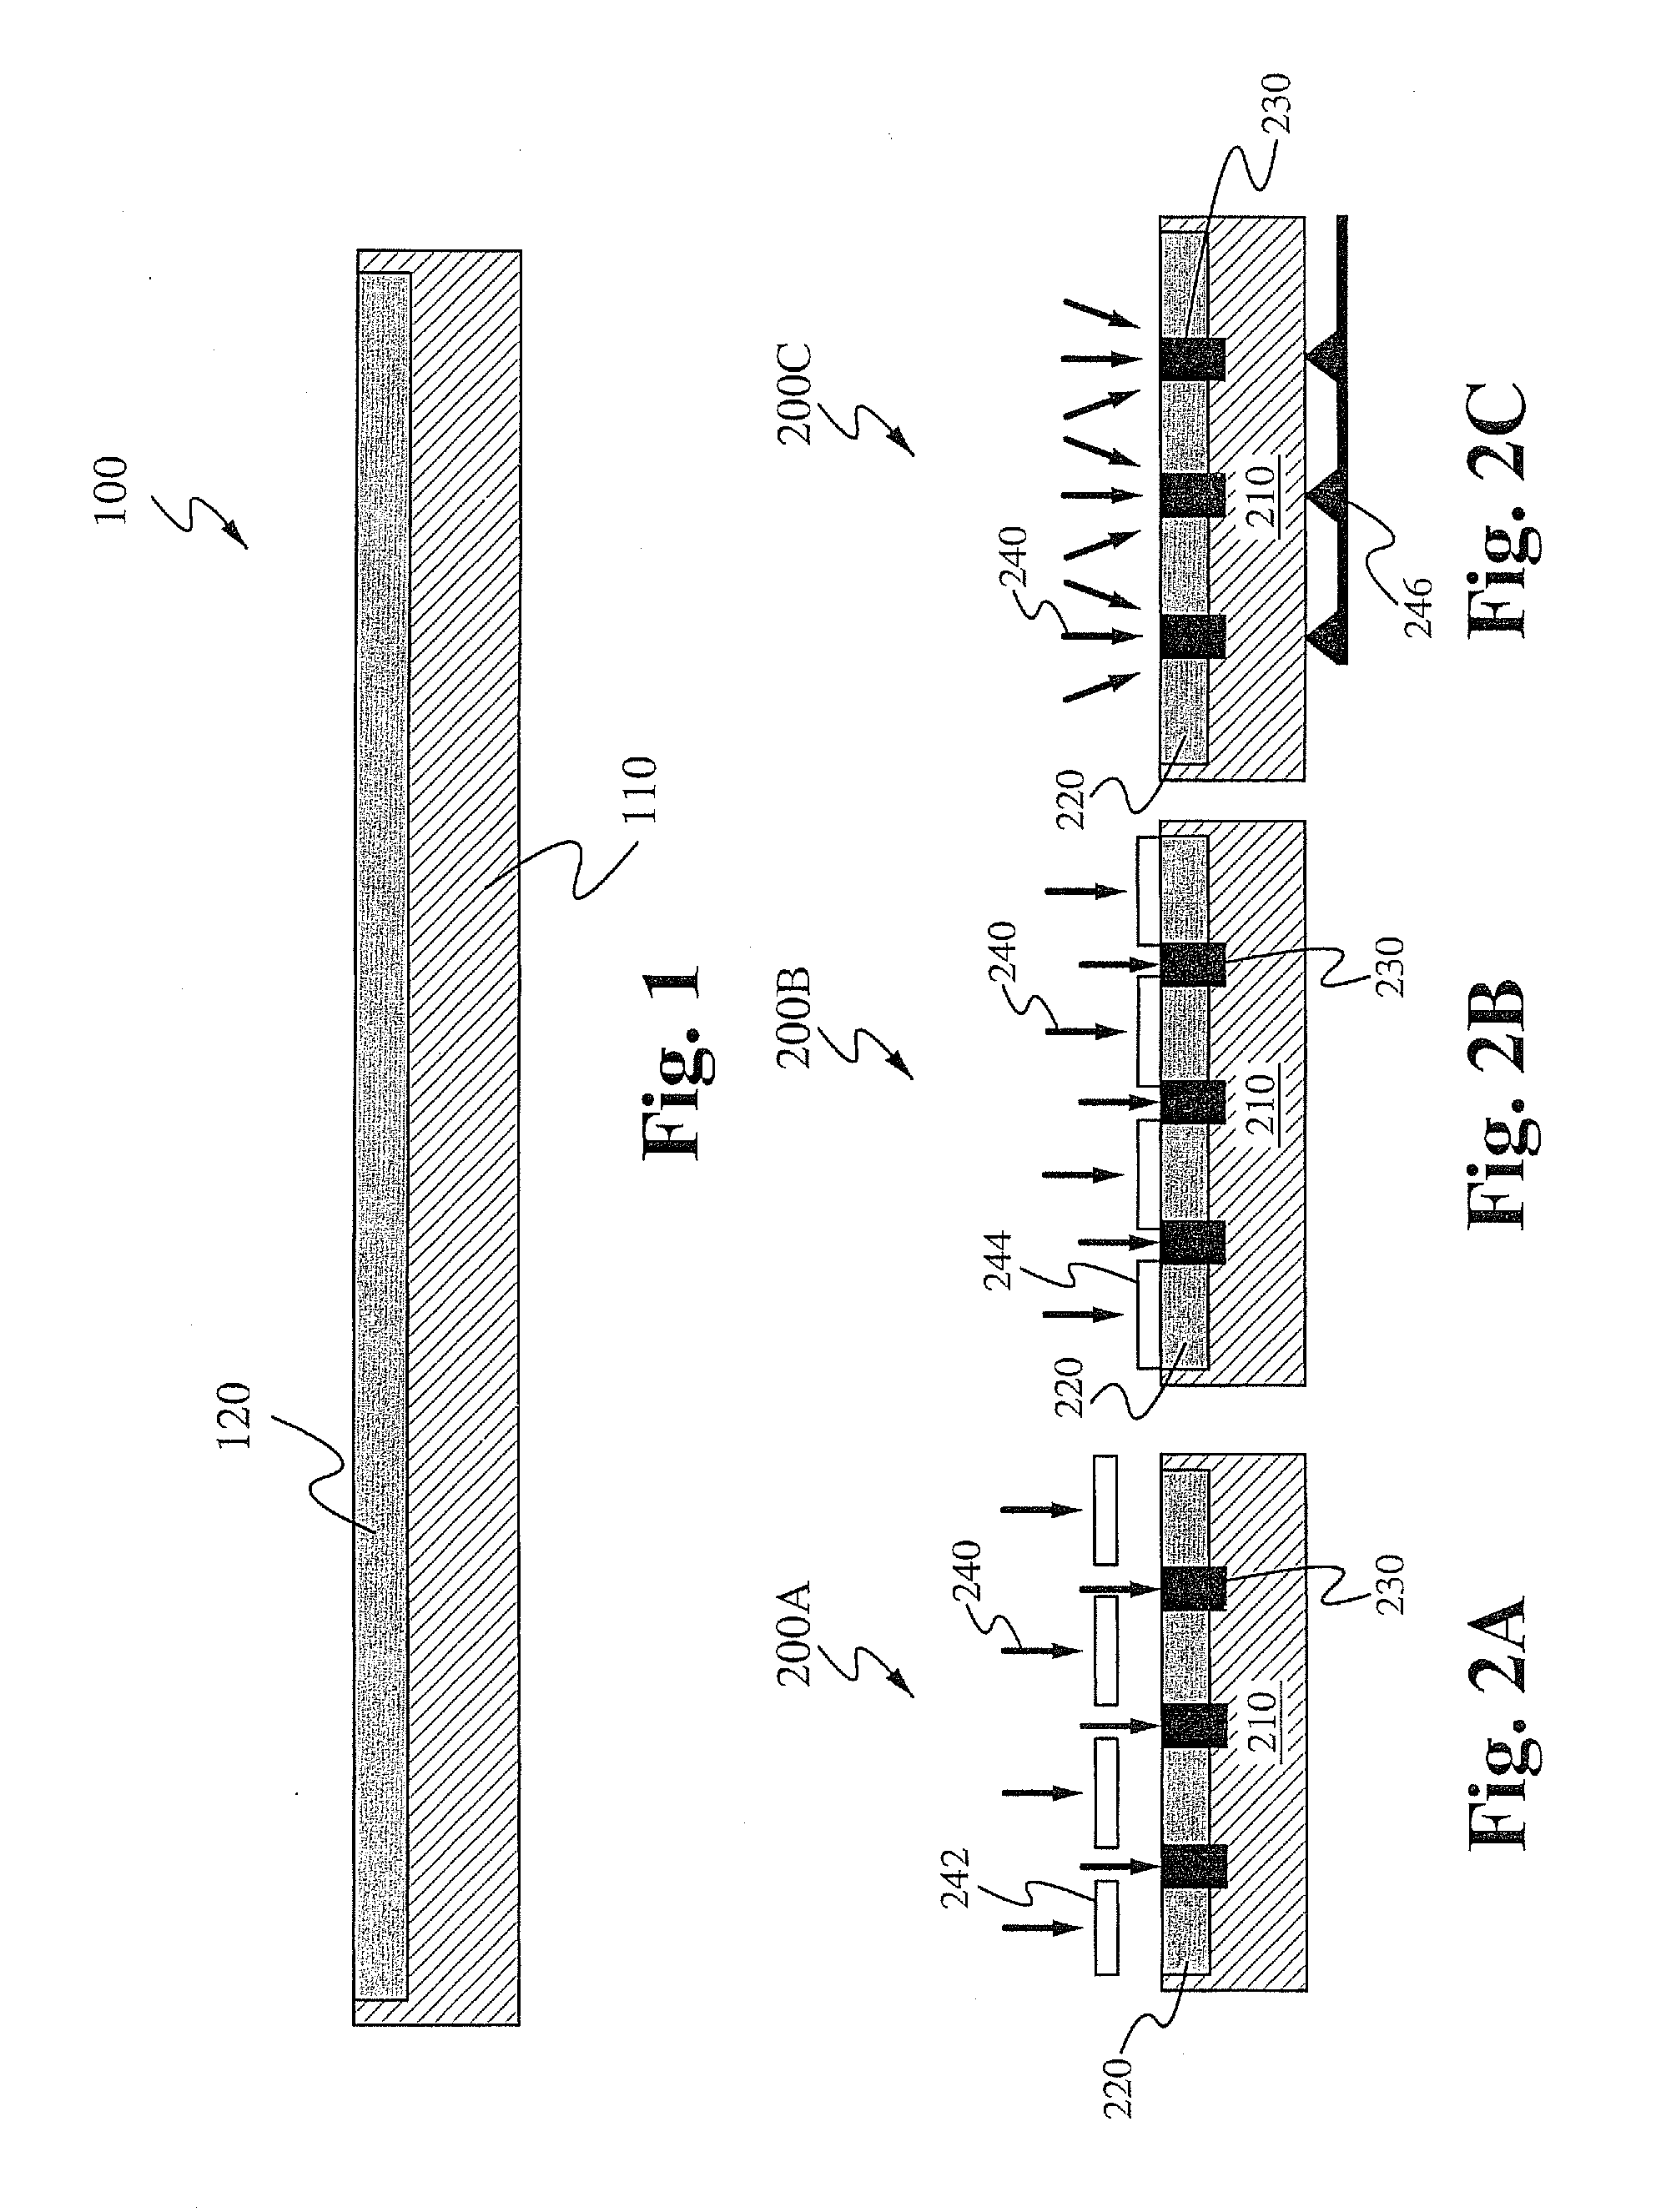 Plasma grid implant system for use in solar cell fabrications